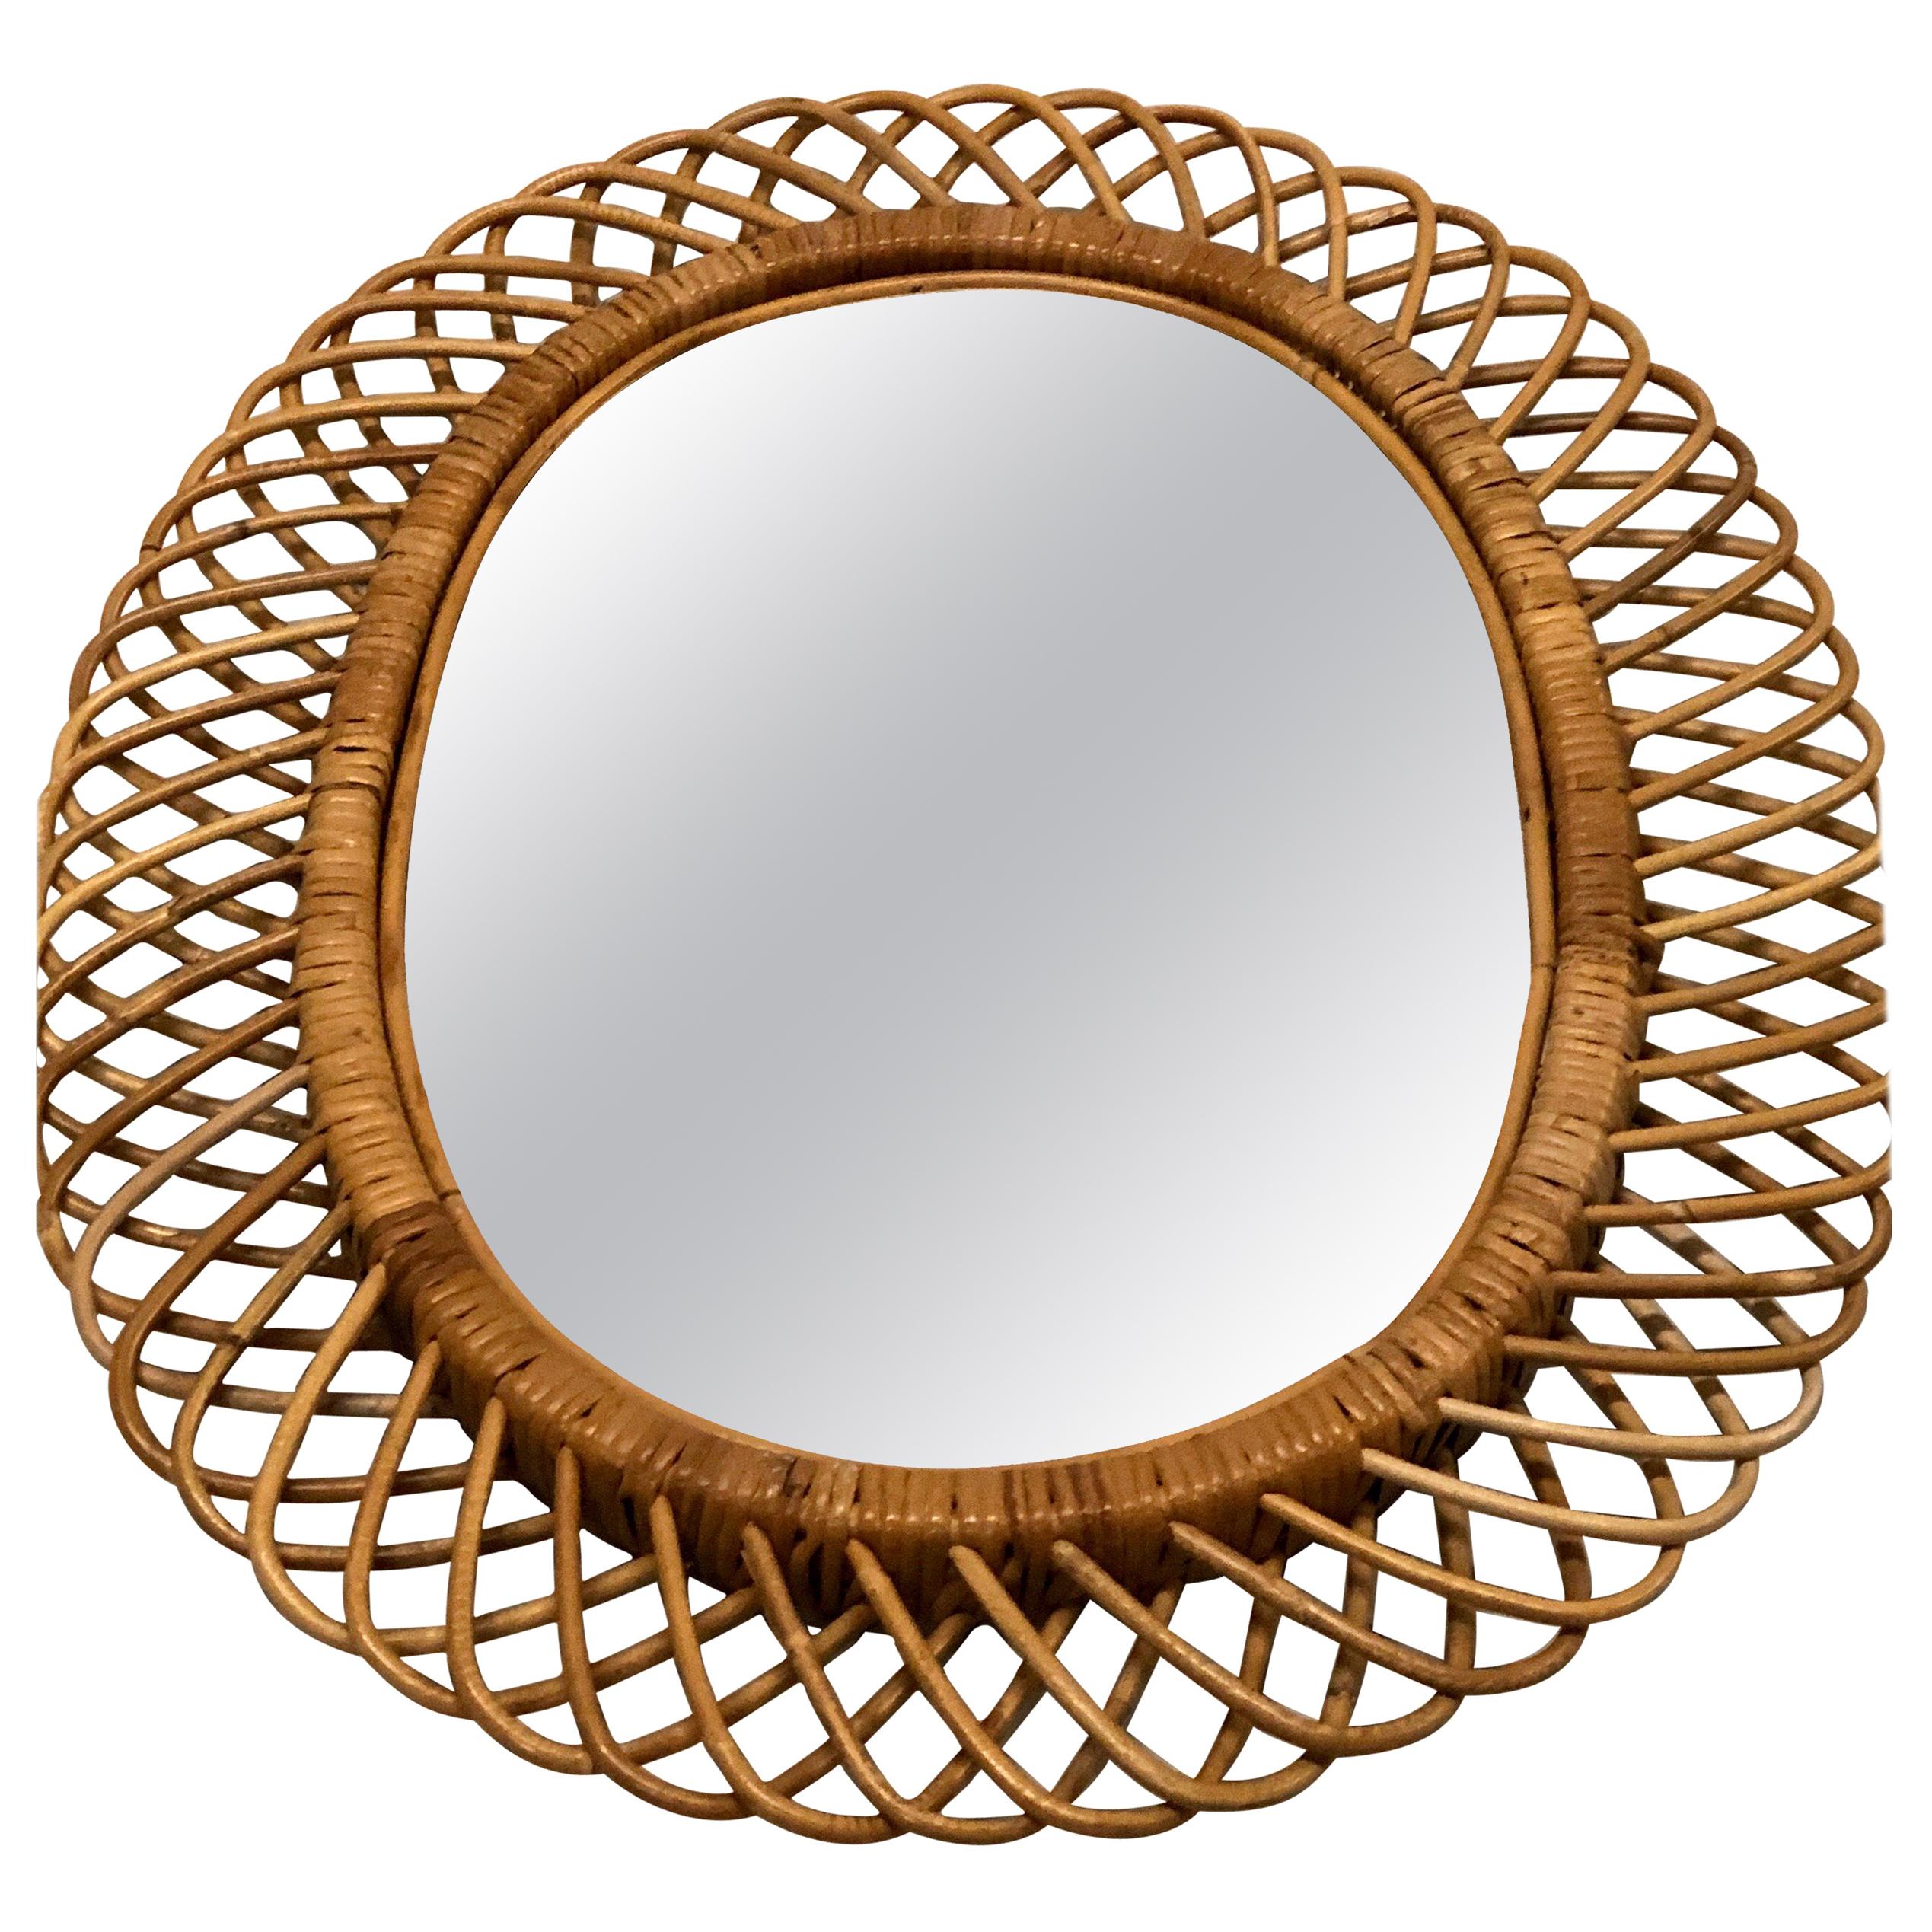 Two (2) Elegant Italian Mid-Century Modern rattan and bamboo wall mirrors in the style of Franco Albini circa 1950 to 1960. Each mirror is hand made and delicately shaped in the form of a crescent or sunburst. Each is in very good condition, Please